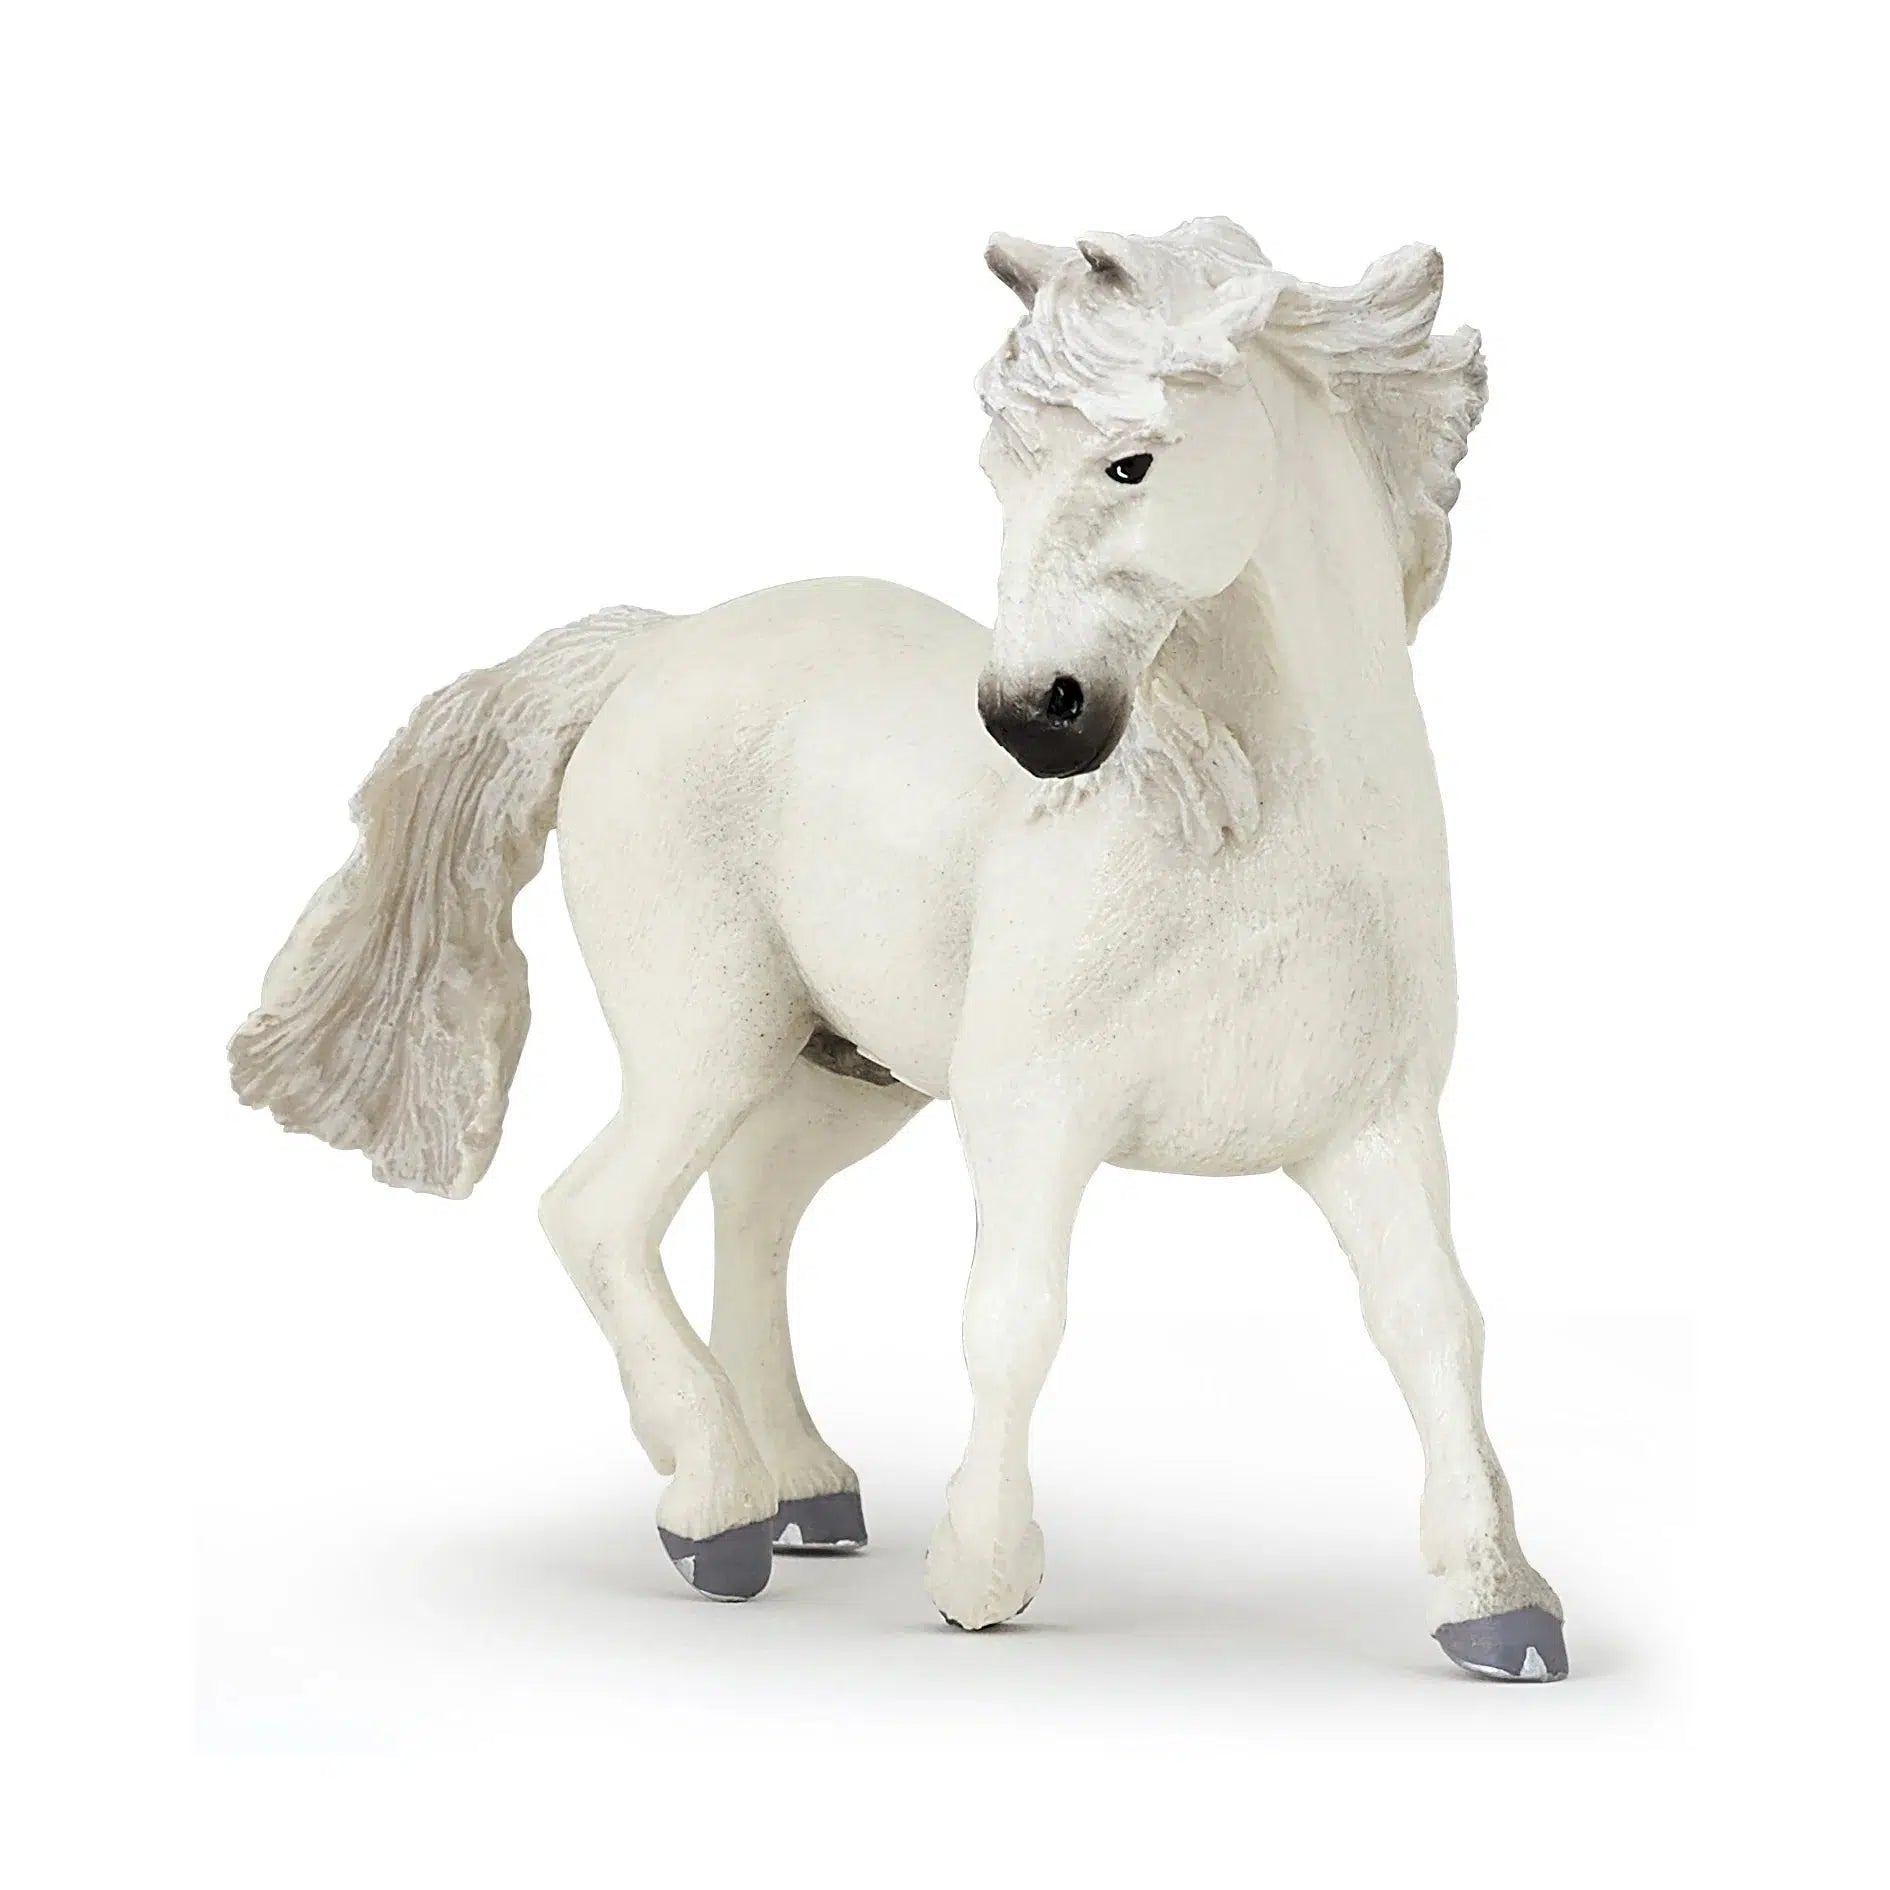 Front view of the Camargue Horse figurine against a white background.